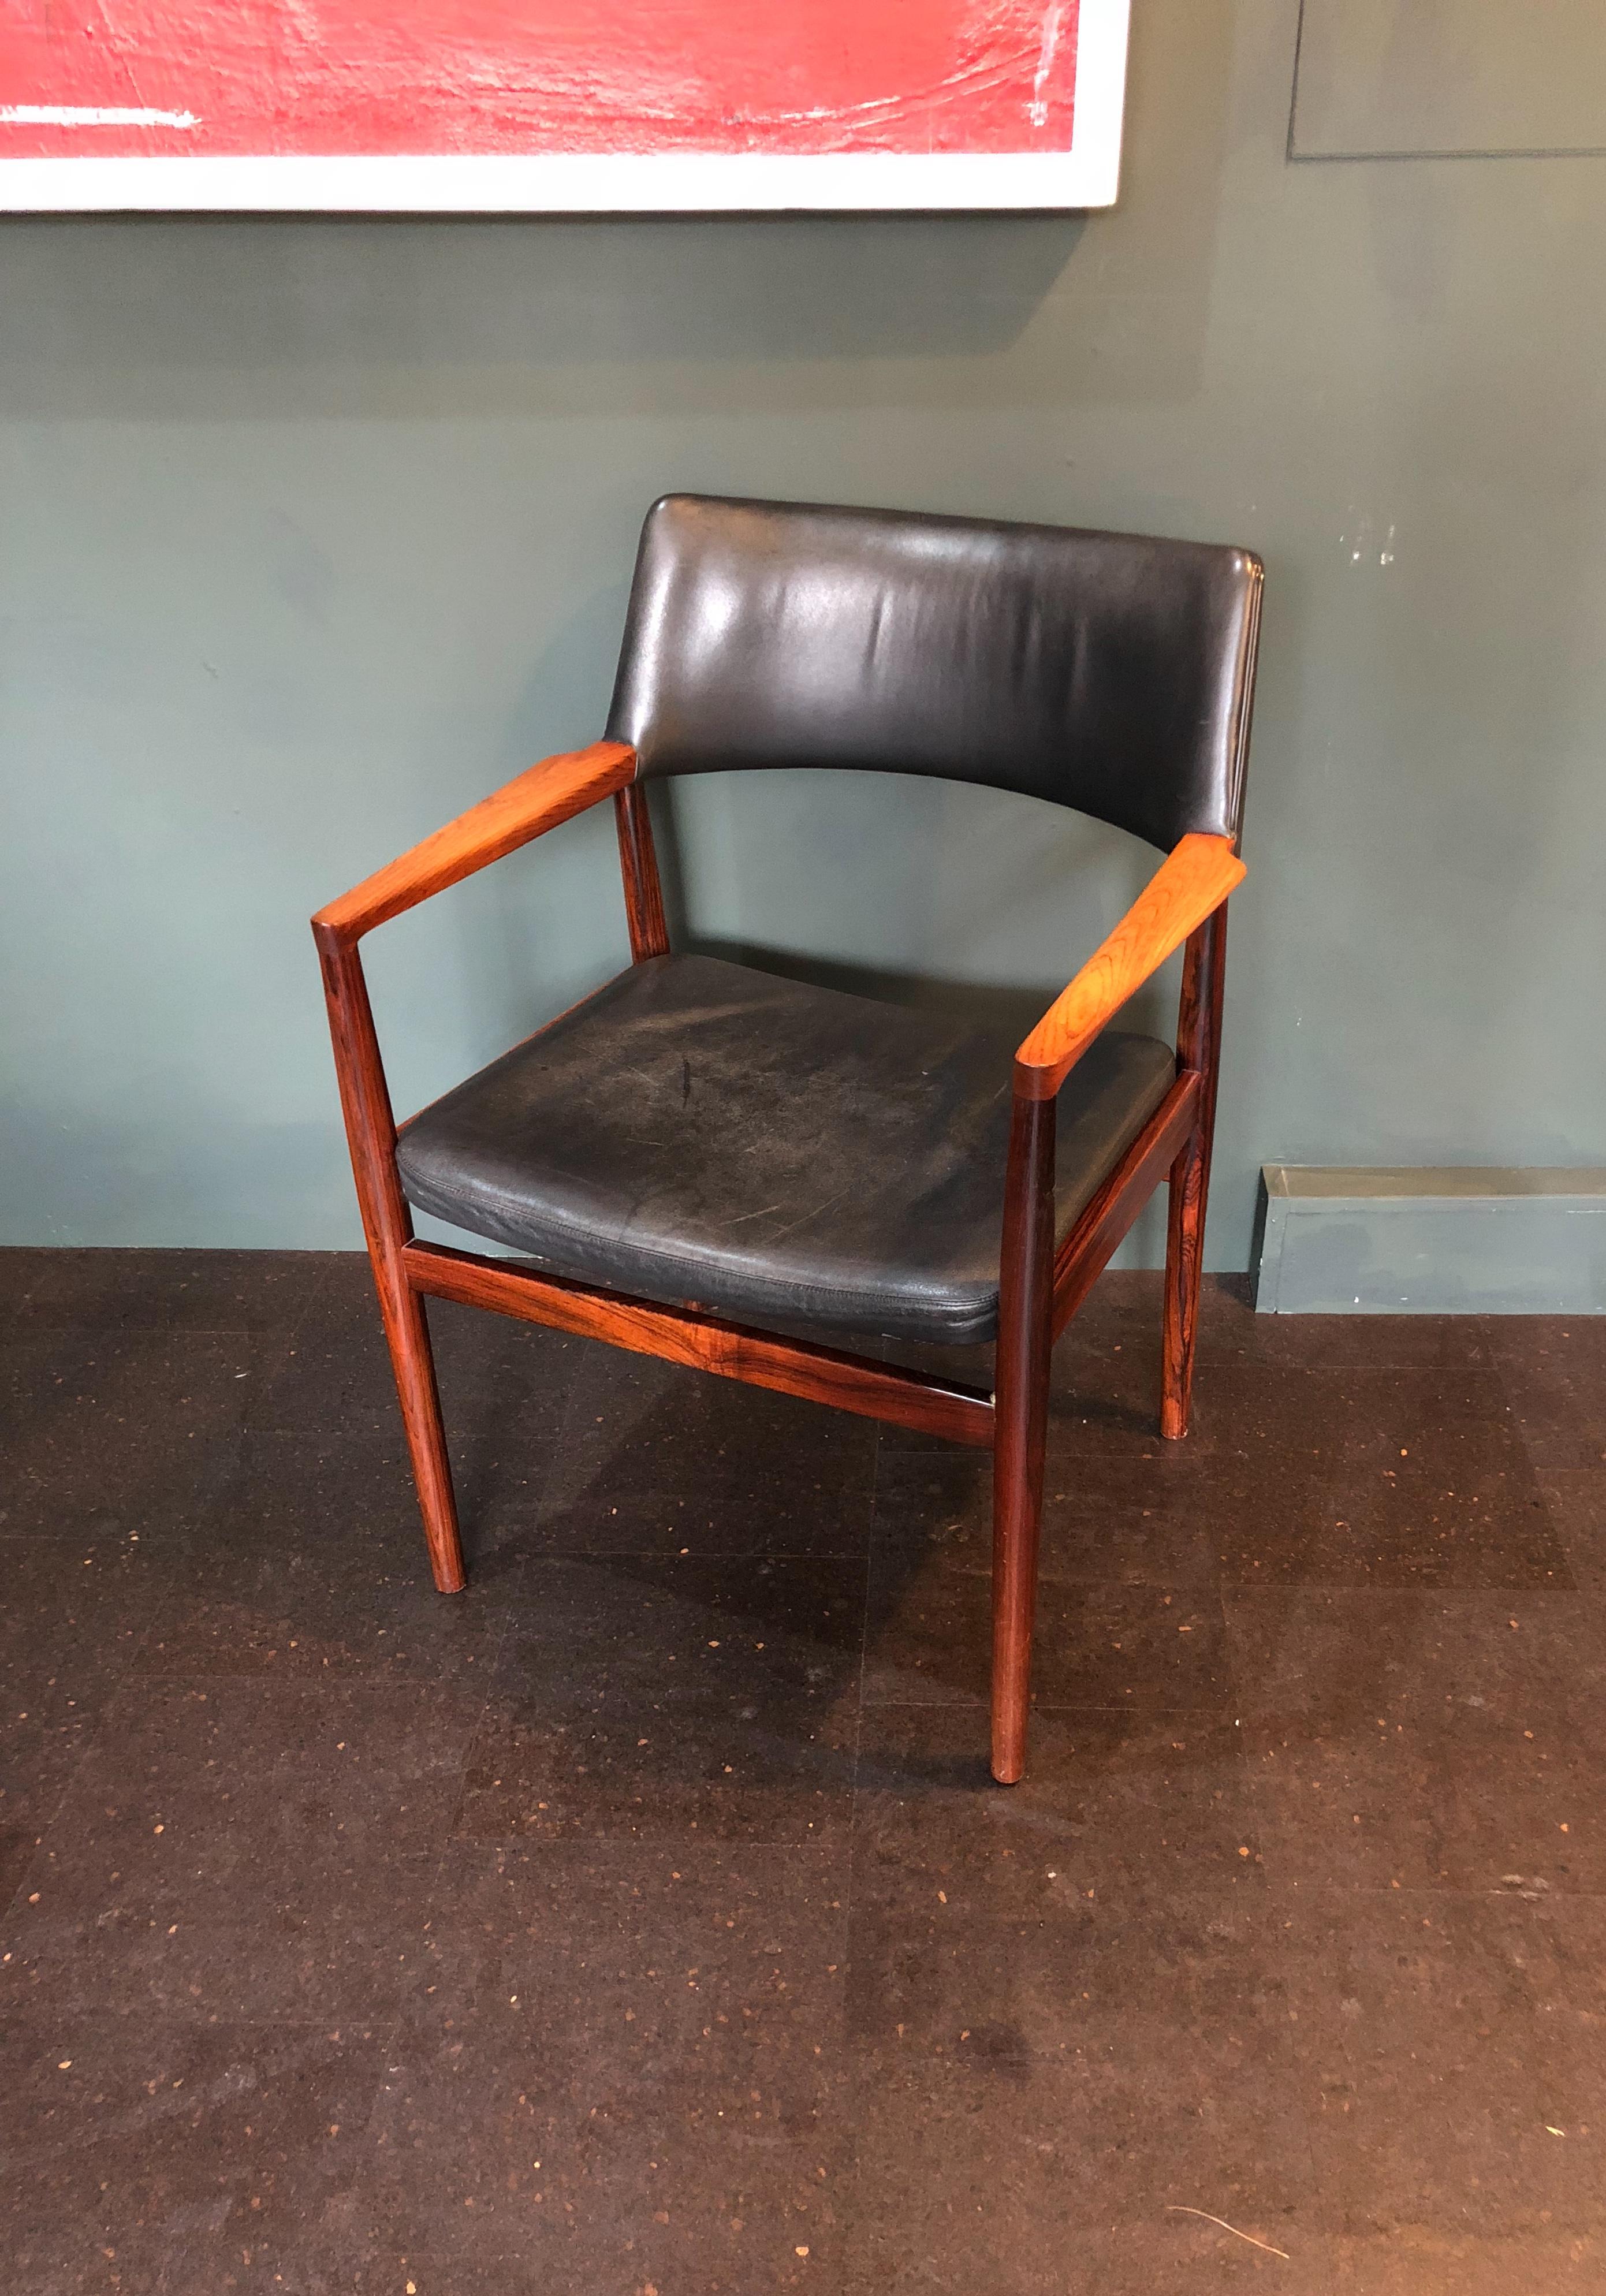 A very fine quality desk chair by Erik Worts. Stunning rosewood frame with original black leather. 
Thoroughly cleaned and re-oiled frame. Very comfortable.